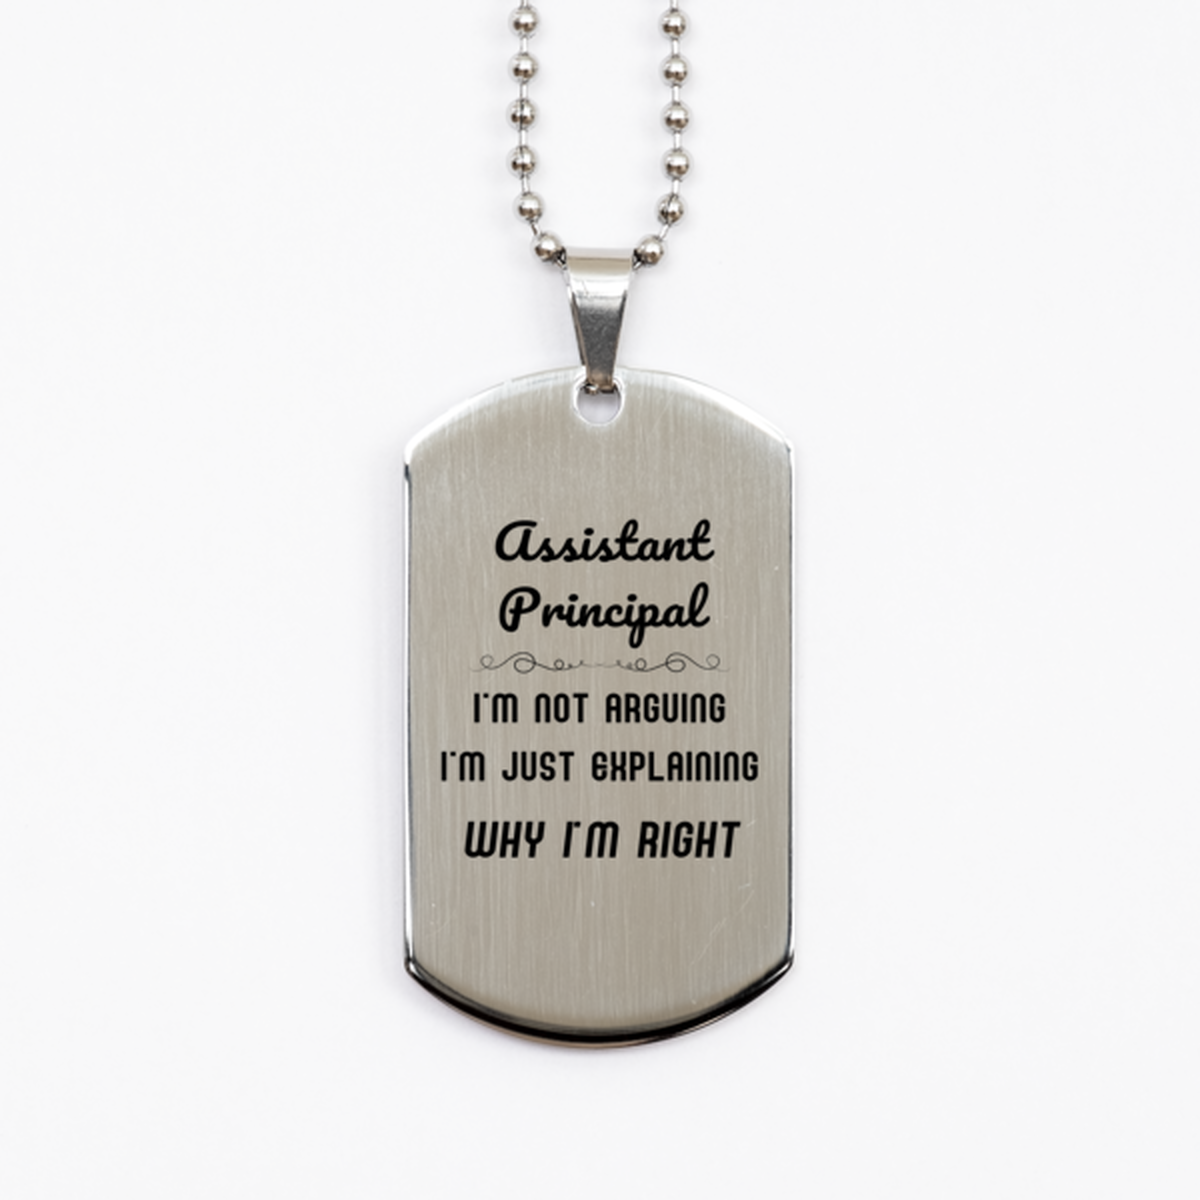 Assistant Principal I'm not Arguing. I'm Just Explaining Why I'm RIGHT Silver Dog Tag, Funny Saying Quote Assistant Principal Gifts For Assistant Principal Graduation Birthday Christmas Gifts for Men Women Coworker